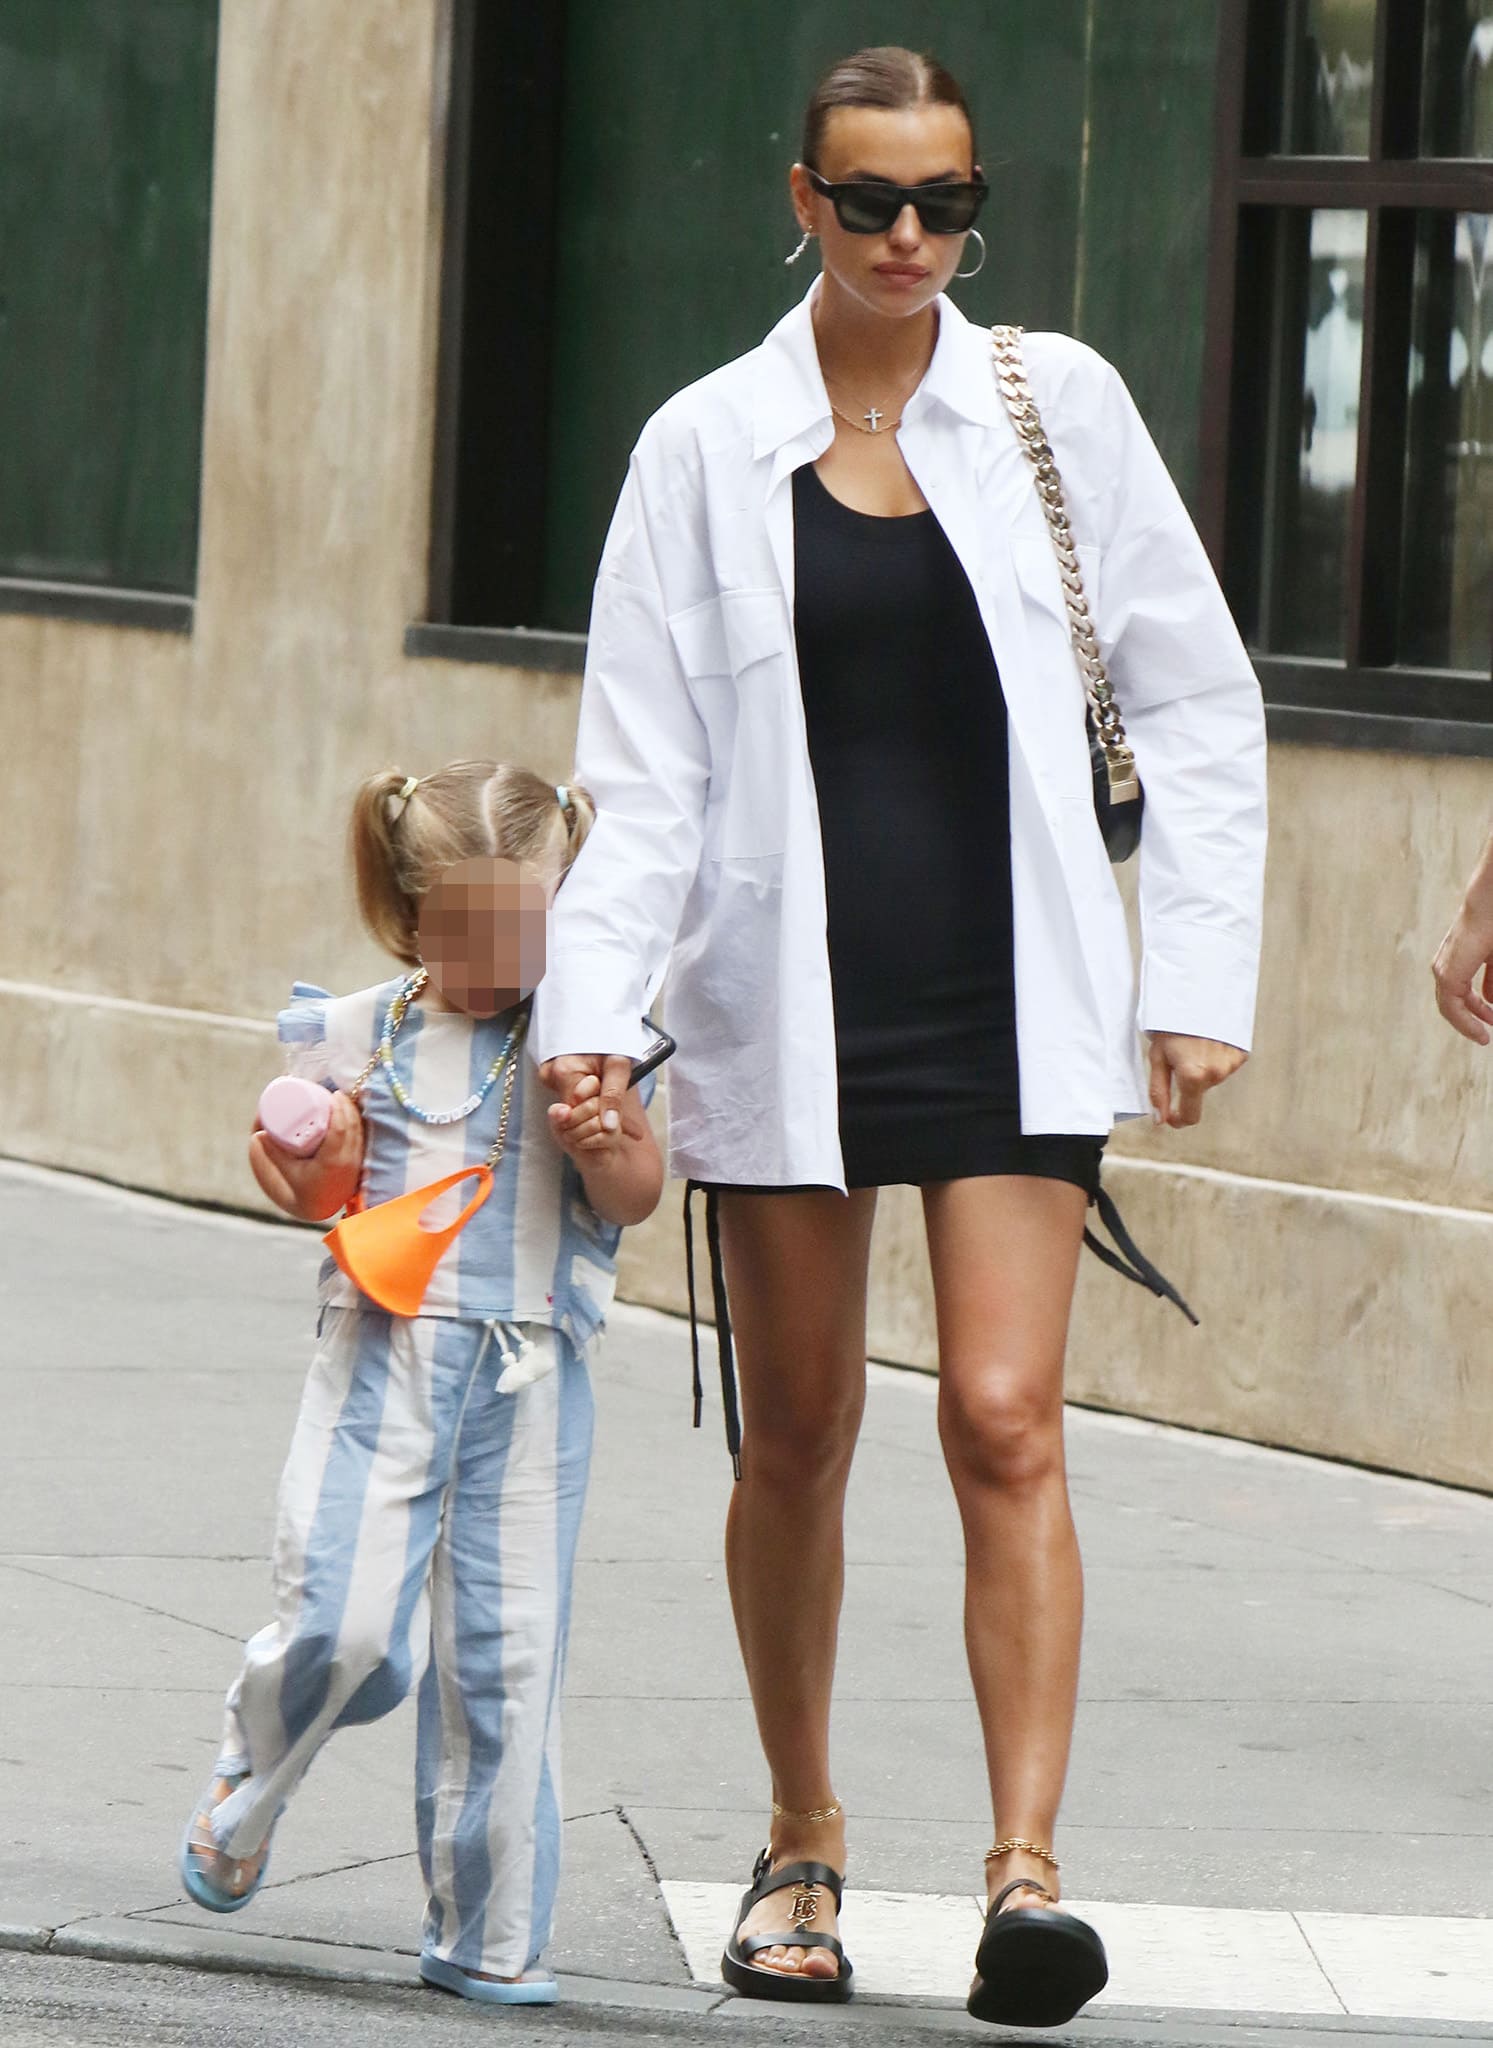 Irina Shayk steps out with daughter in Soho, New York City on June 22, 2021